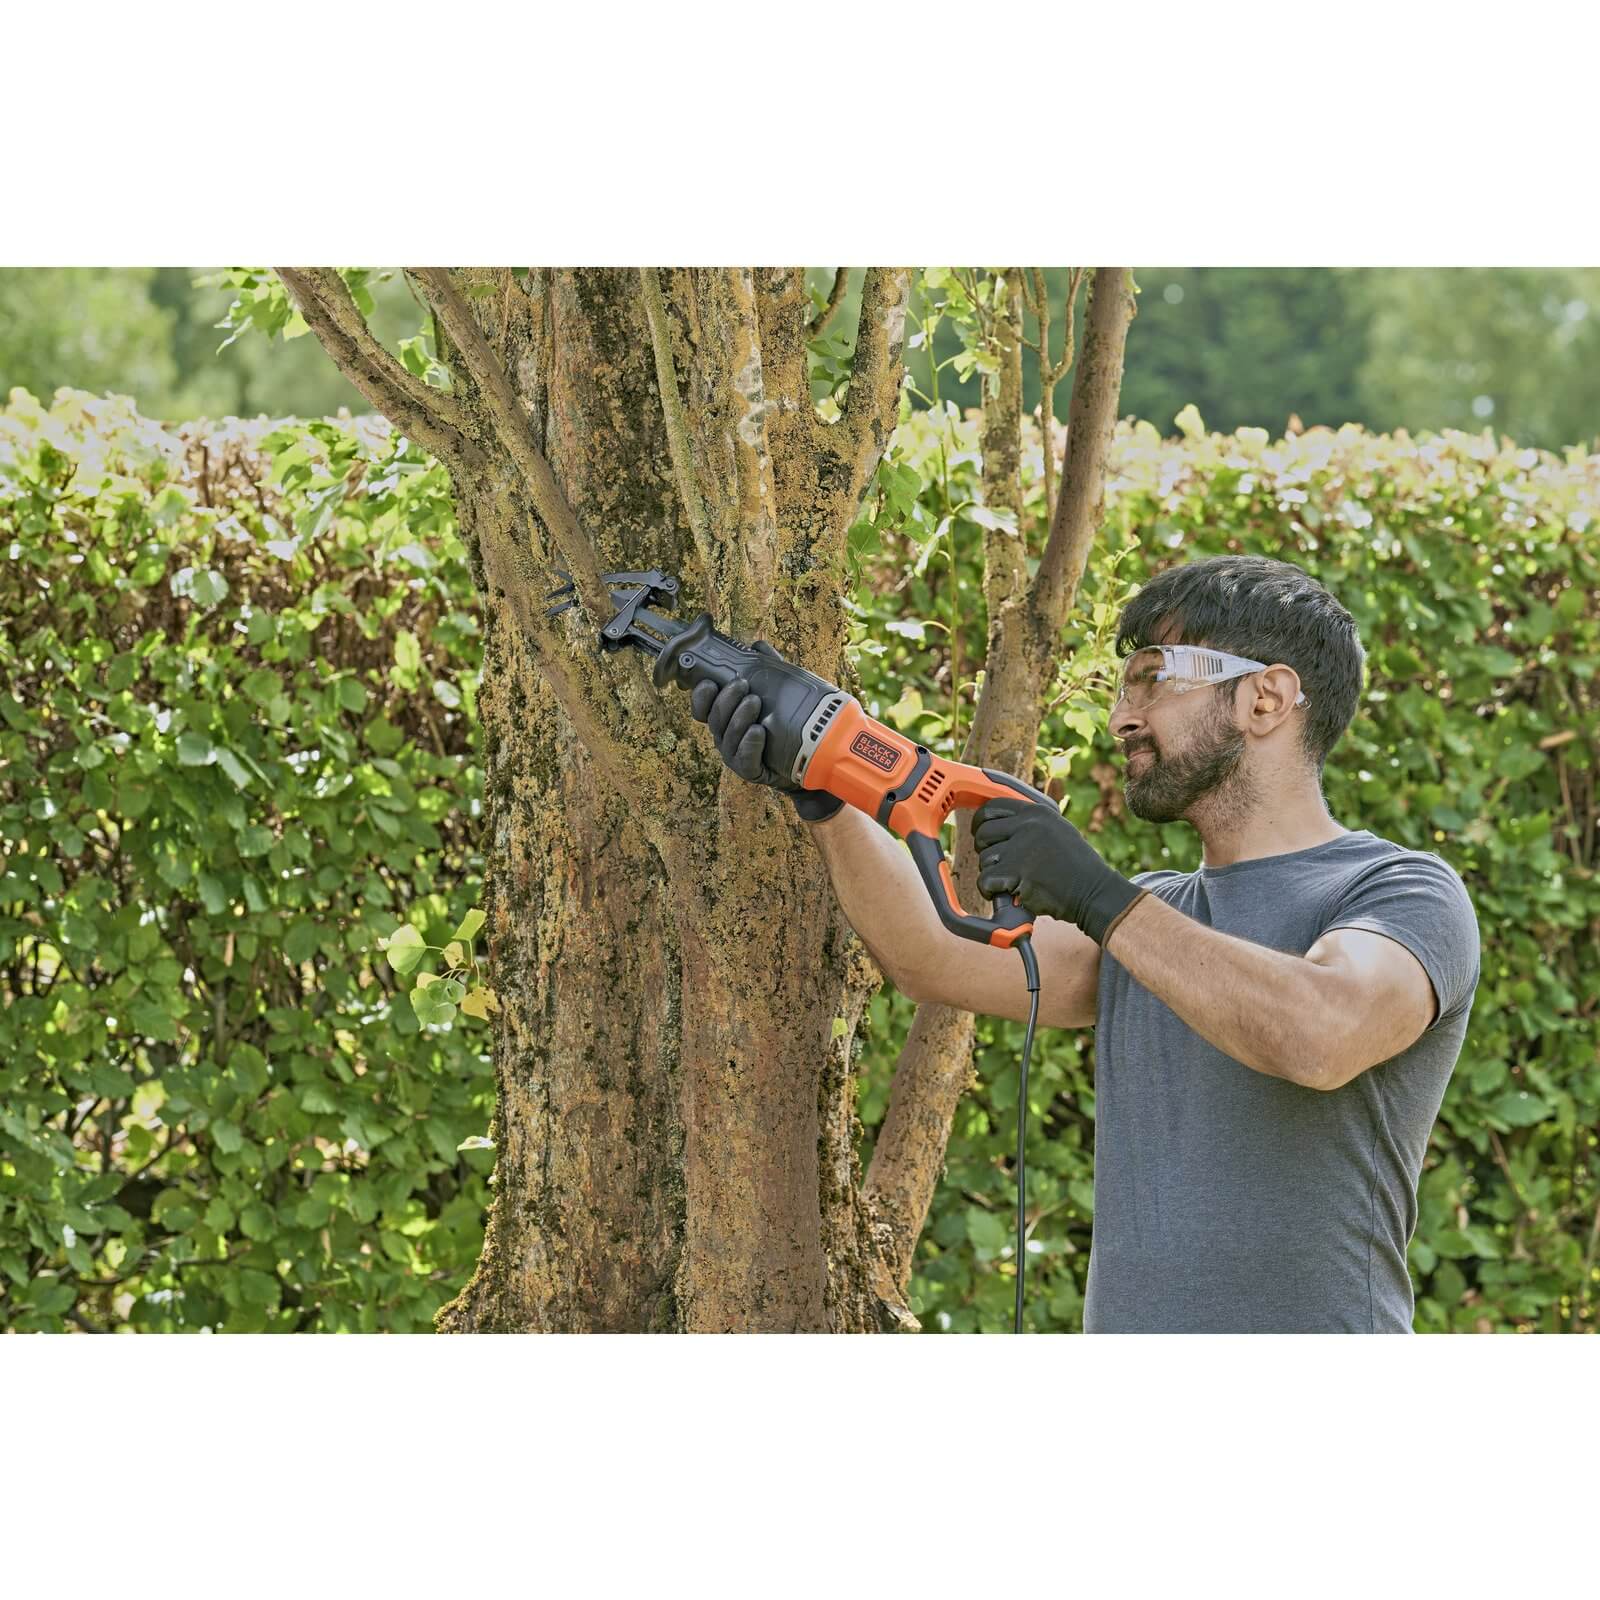 BLACK+DECKER 750W Corded Reciprocating Saw with Branch Holder and Blades (BES301-GB)